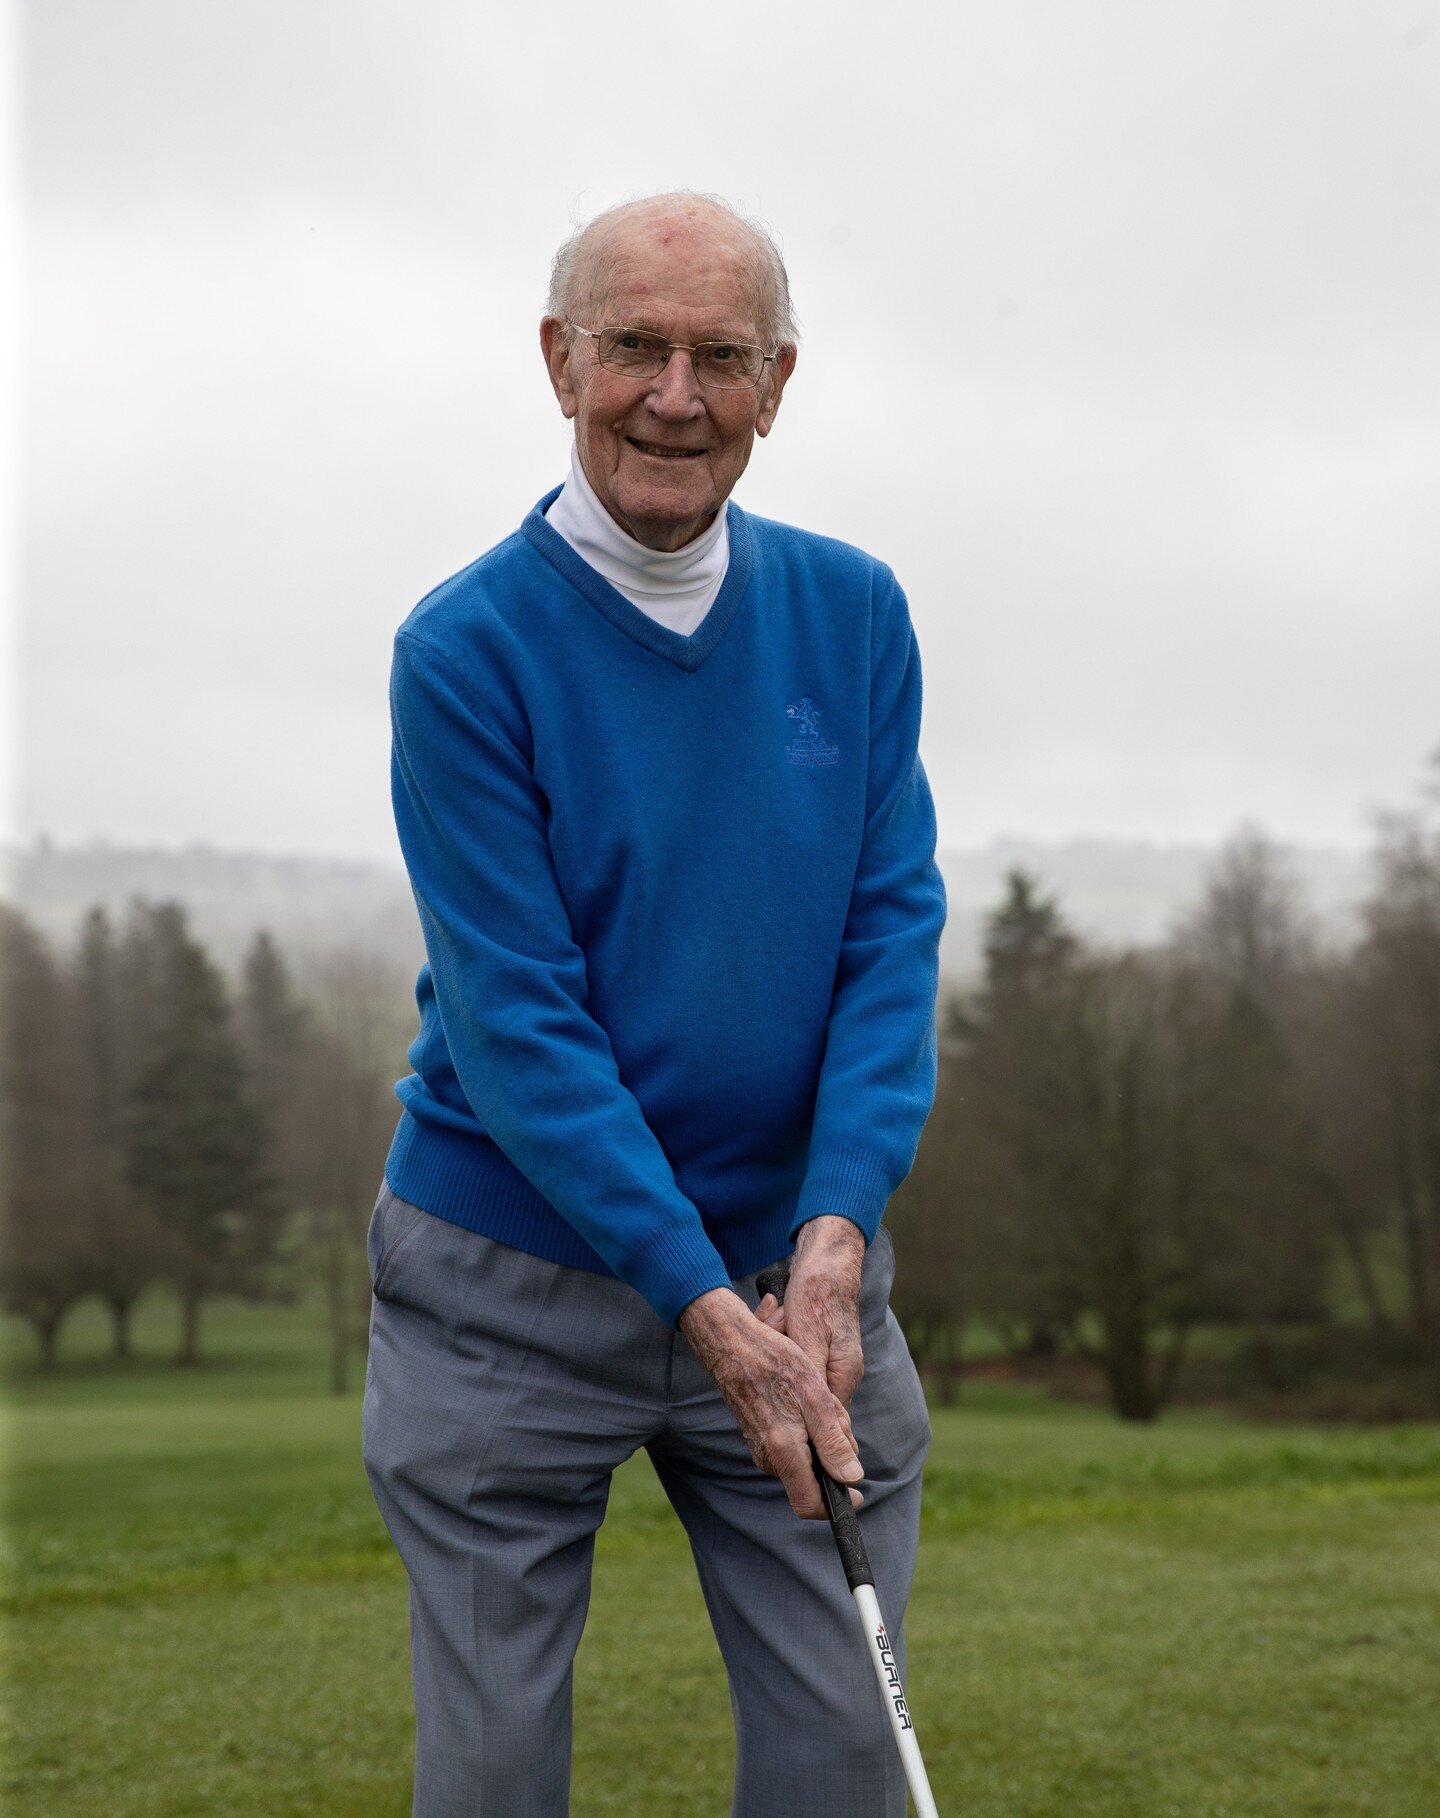 NI veteran still in the swing of things as he turns 100 years young

A Second World War veteran who has established himself as &ldquo;a legend&rdquo; on the golf course as he celebrated his 100th birthday.

Victor Clarke had a full weekend of parties